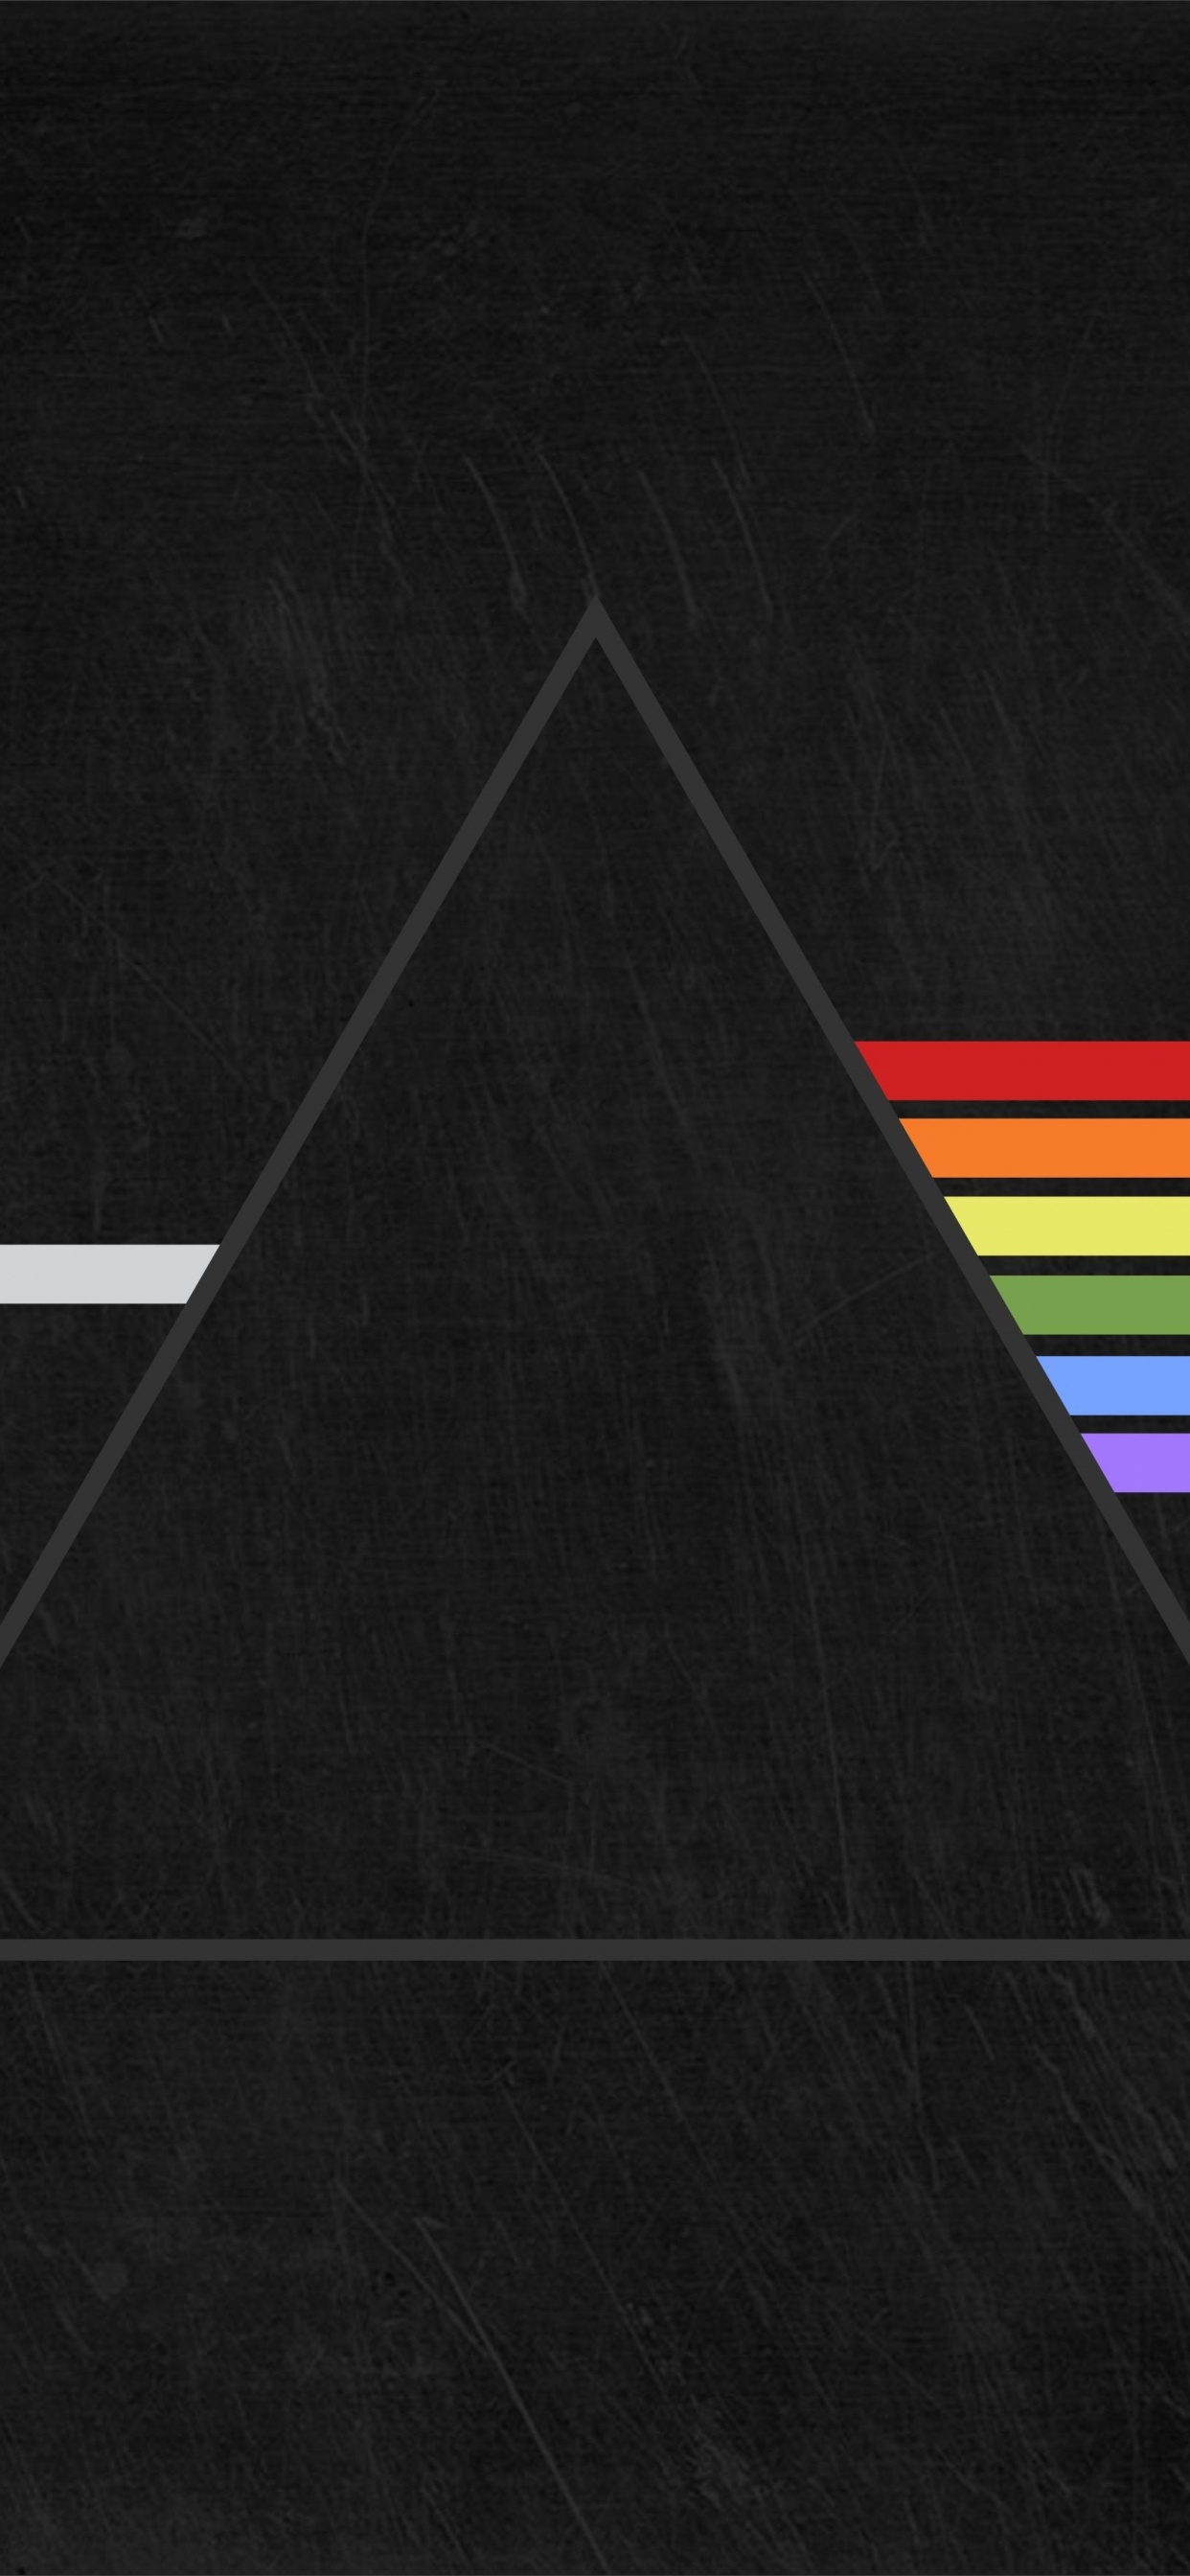 The Dark Side of The Moon, Pink Floyd, Prism, Black, Line. Wallpaper in 1242x2688 Resolution